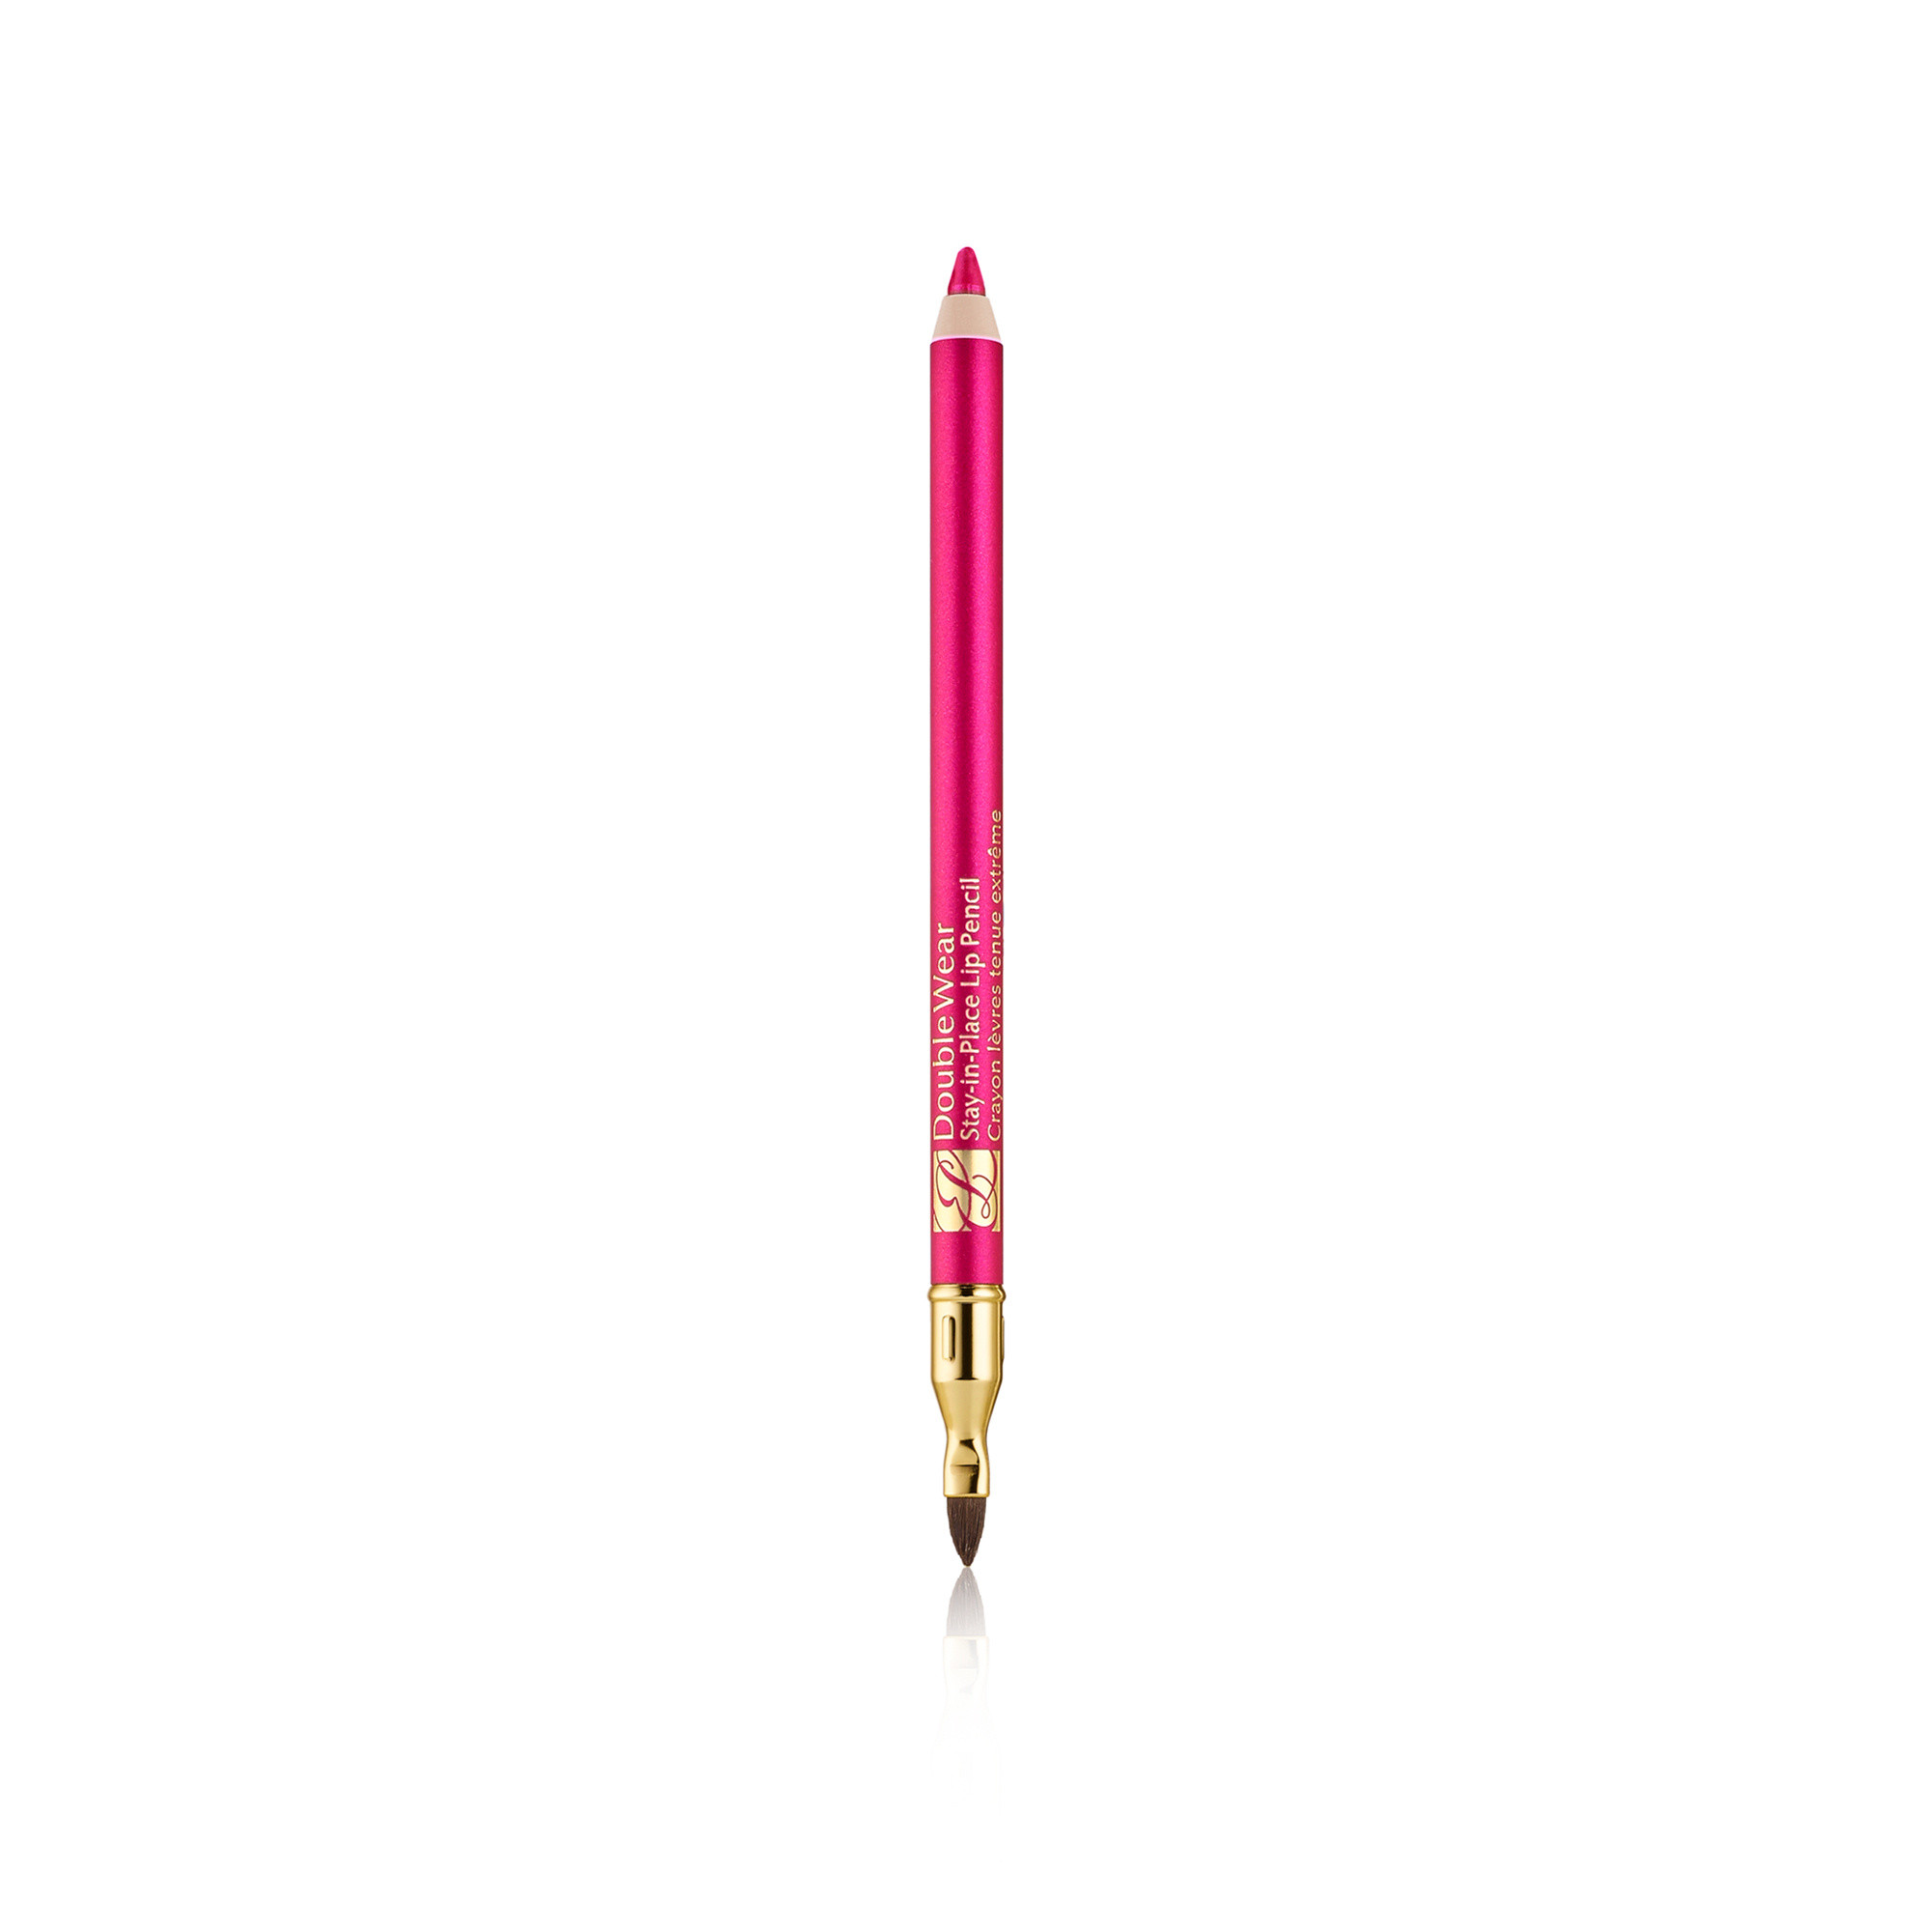 ESTÉE LAUDER DOUBLE WEAR STAY-IN-PLACE LIP PENCIL - RED 1,2 G, Red, large image number 0